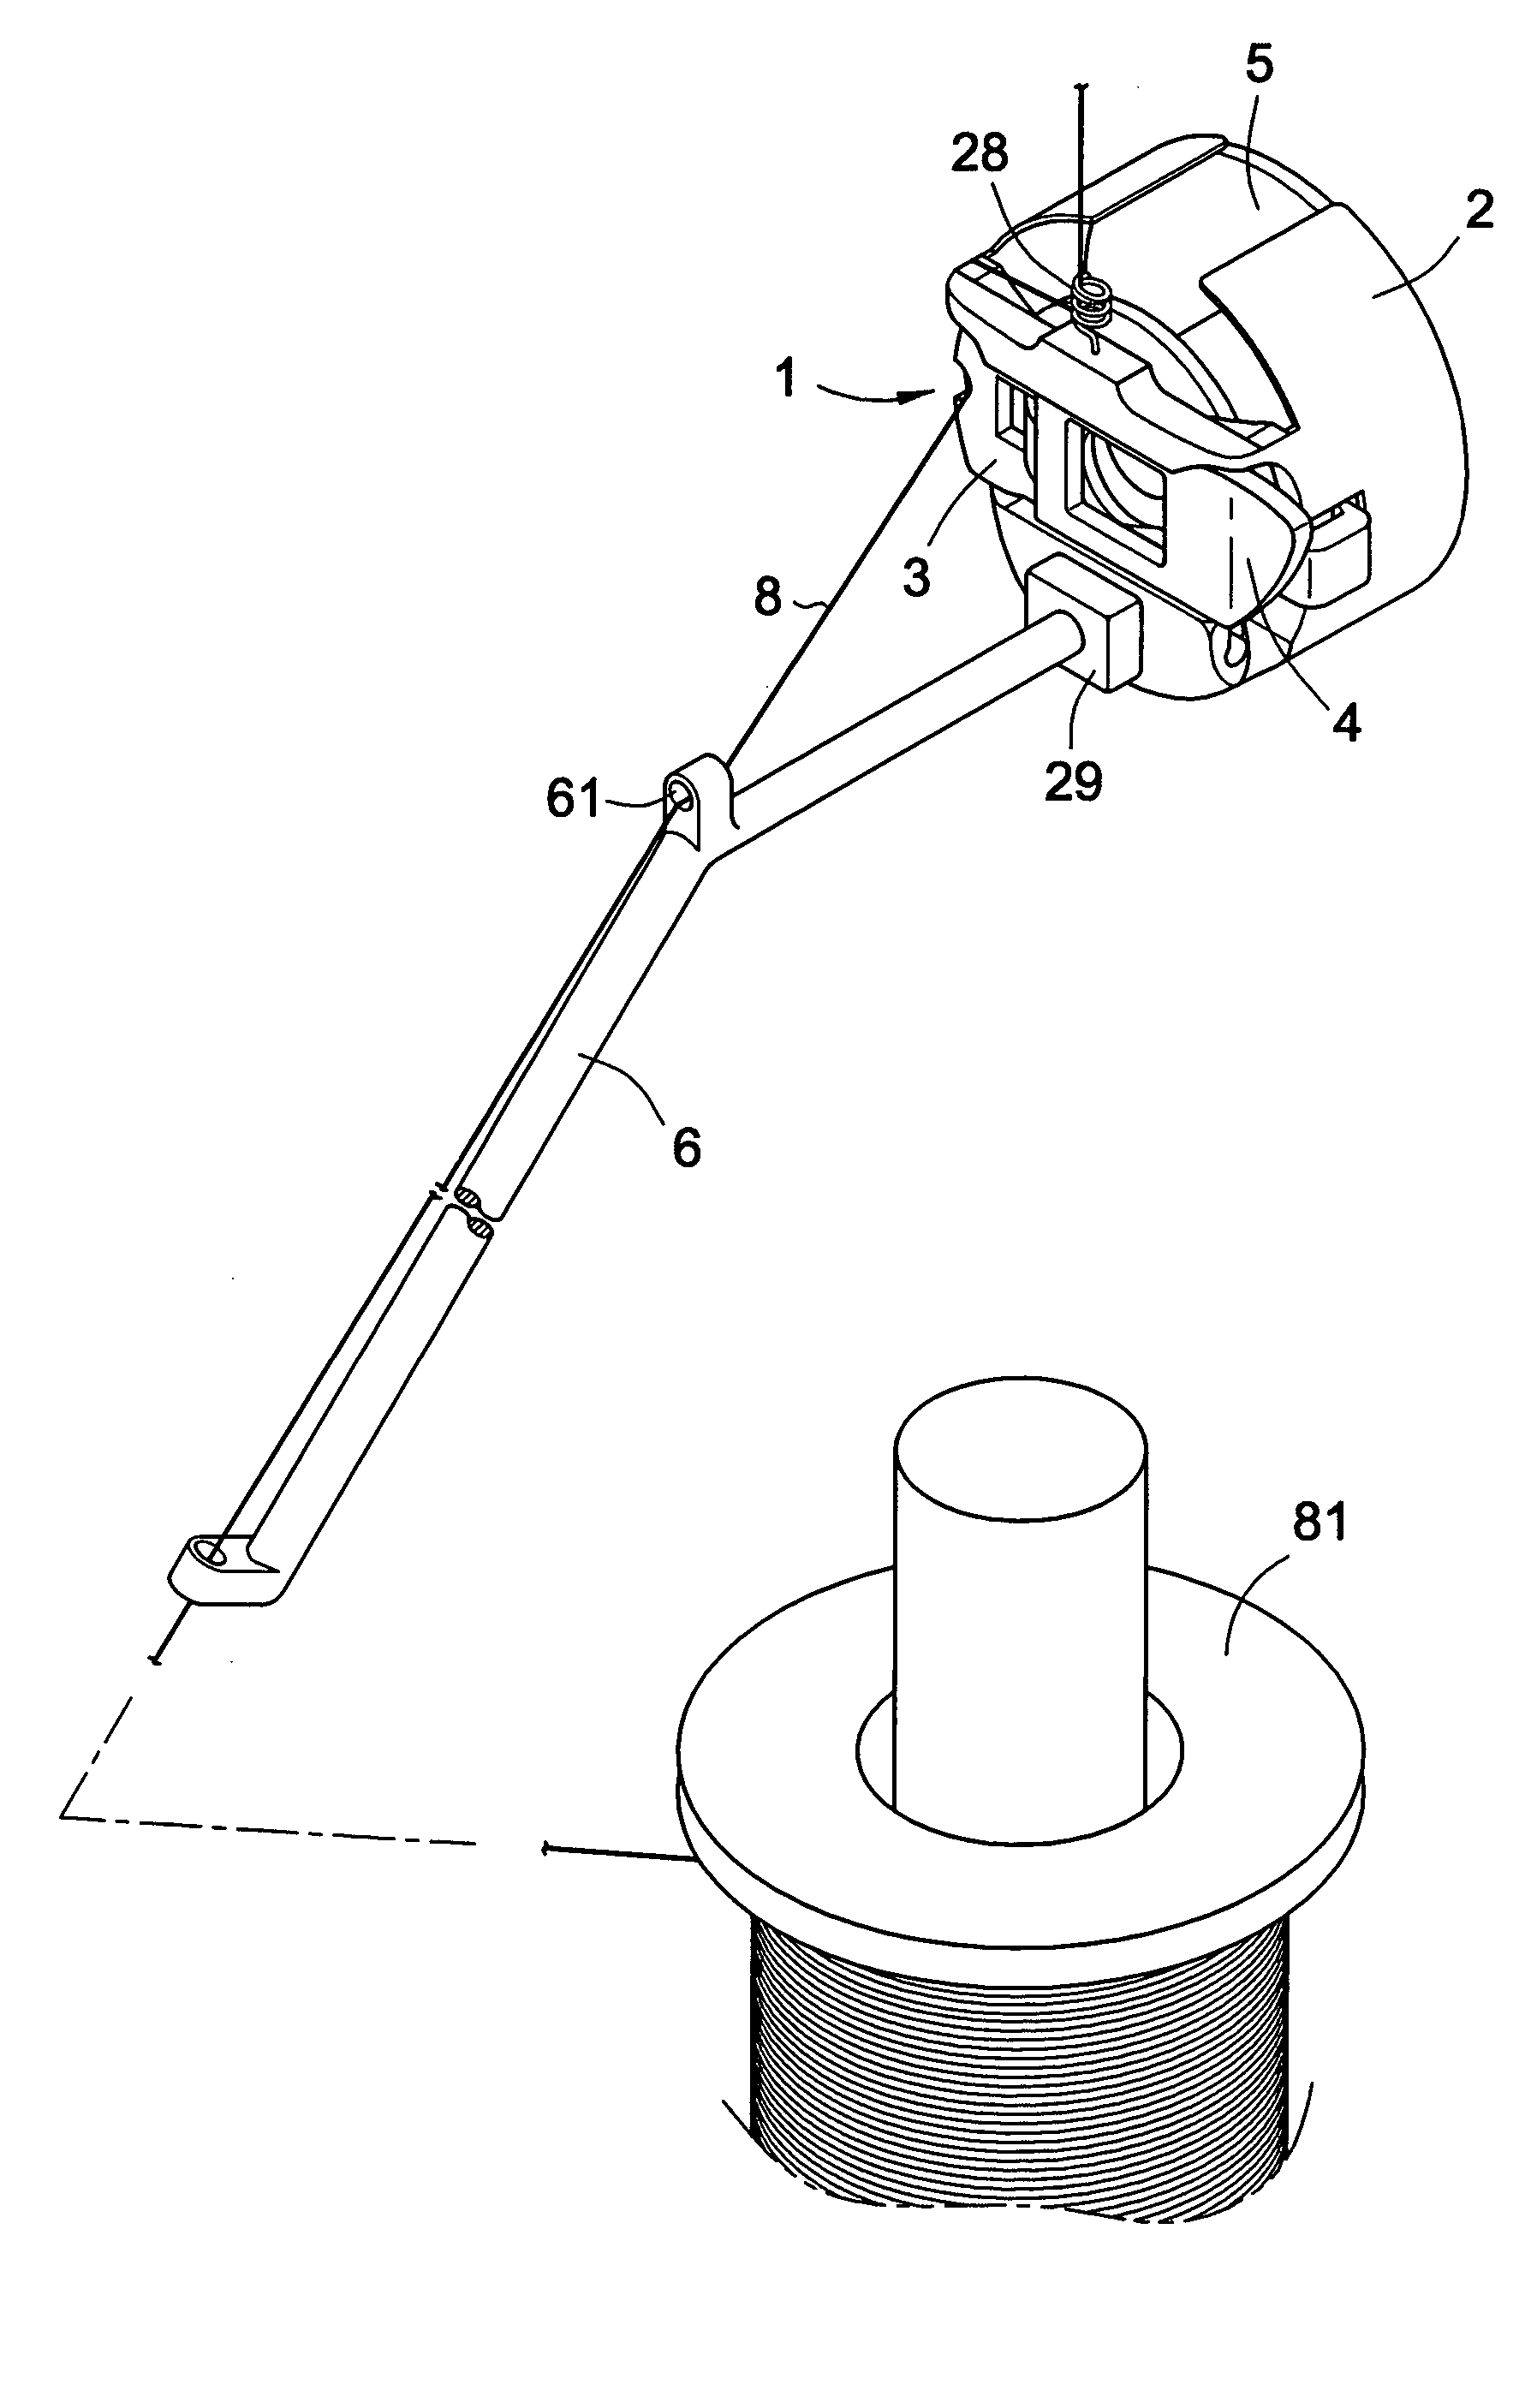 Wire-guiding structure of a shuttle of a sewing machine